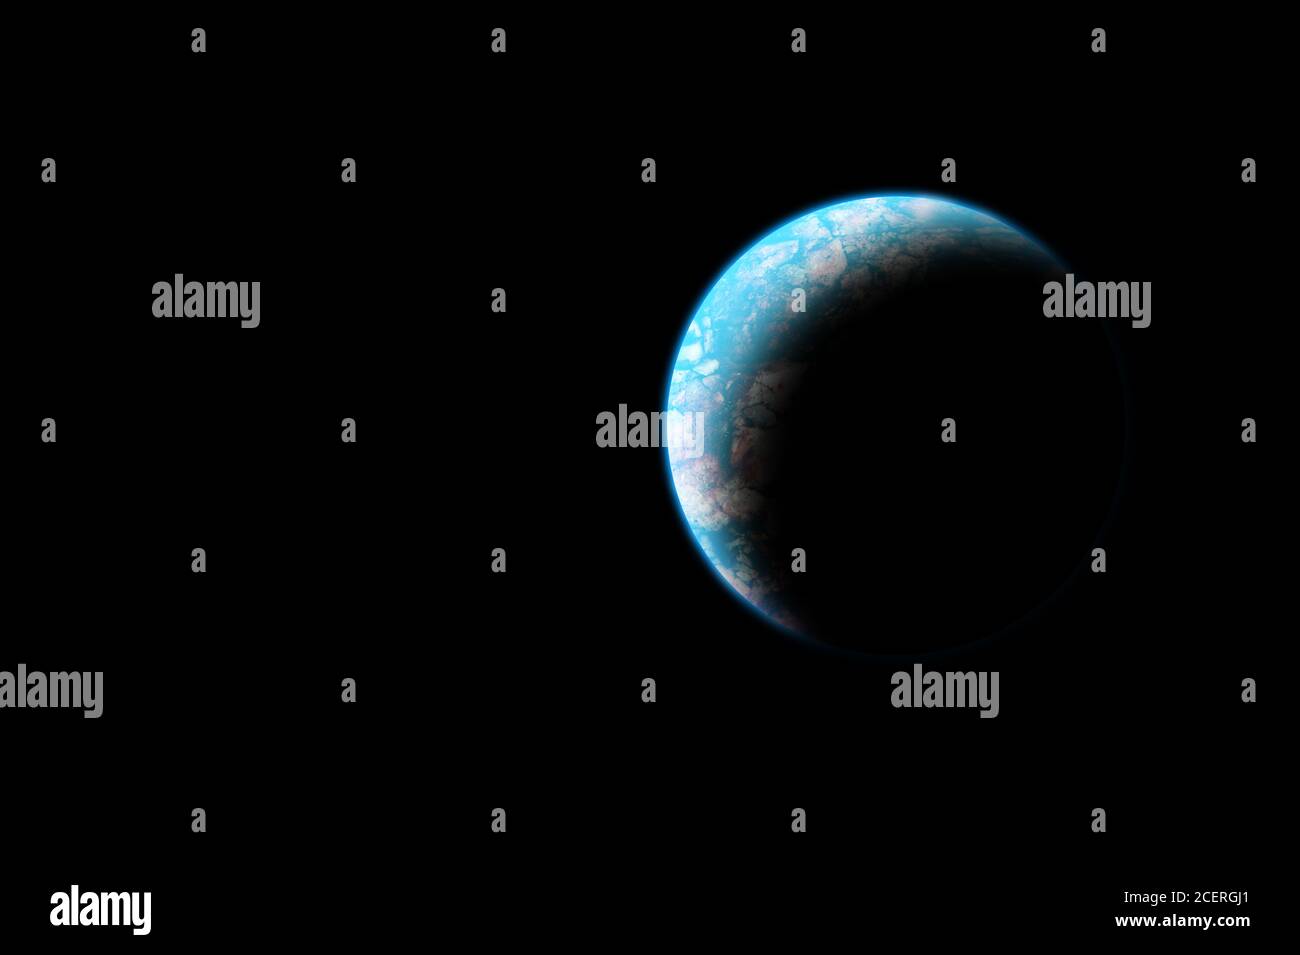 Blue alien planet in space. Isolated on black background with copy space. Stock Photo